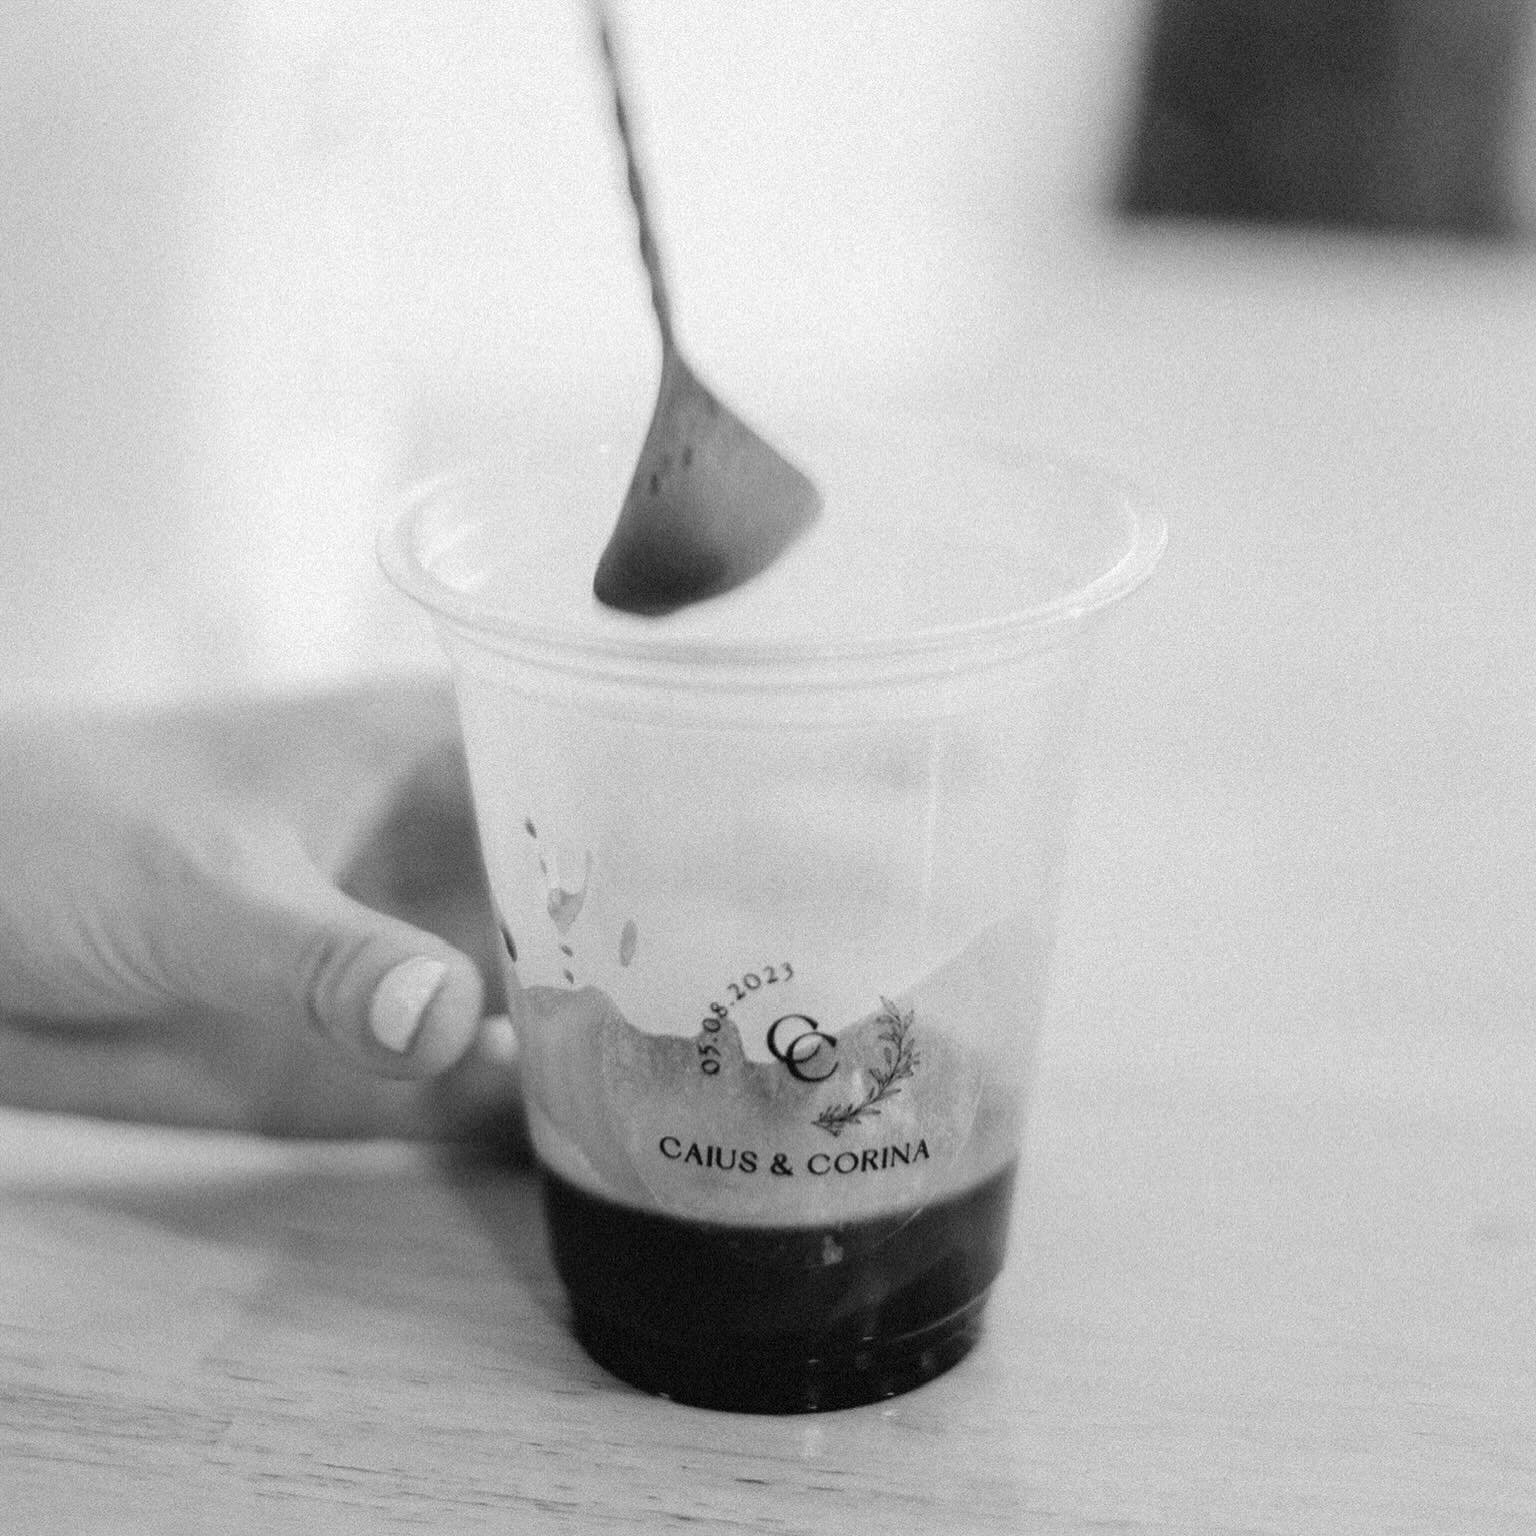 Sip after sip, our commitment to consistency shines through. ✨☕️ Experience the difference with Aviator Coffee Company - link in our bio. 🔗
#coffeecart #mobilecoffee #weddingvendor #atl #atlantageorgia #mobileespressobar #coffeecartga